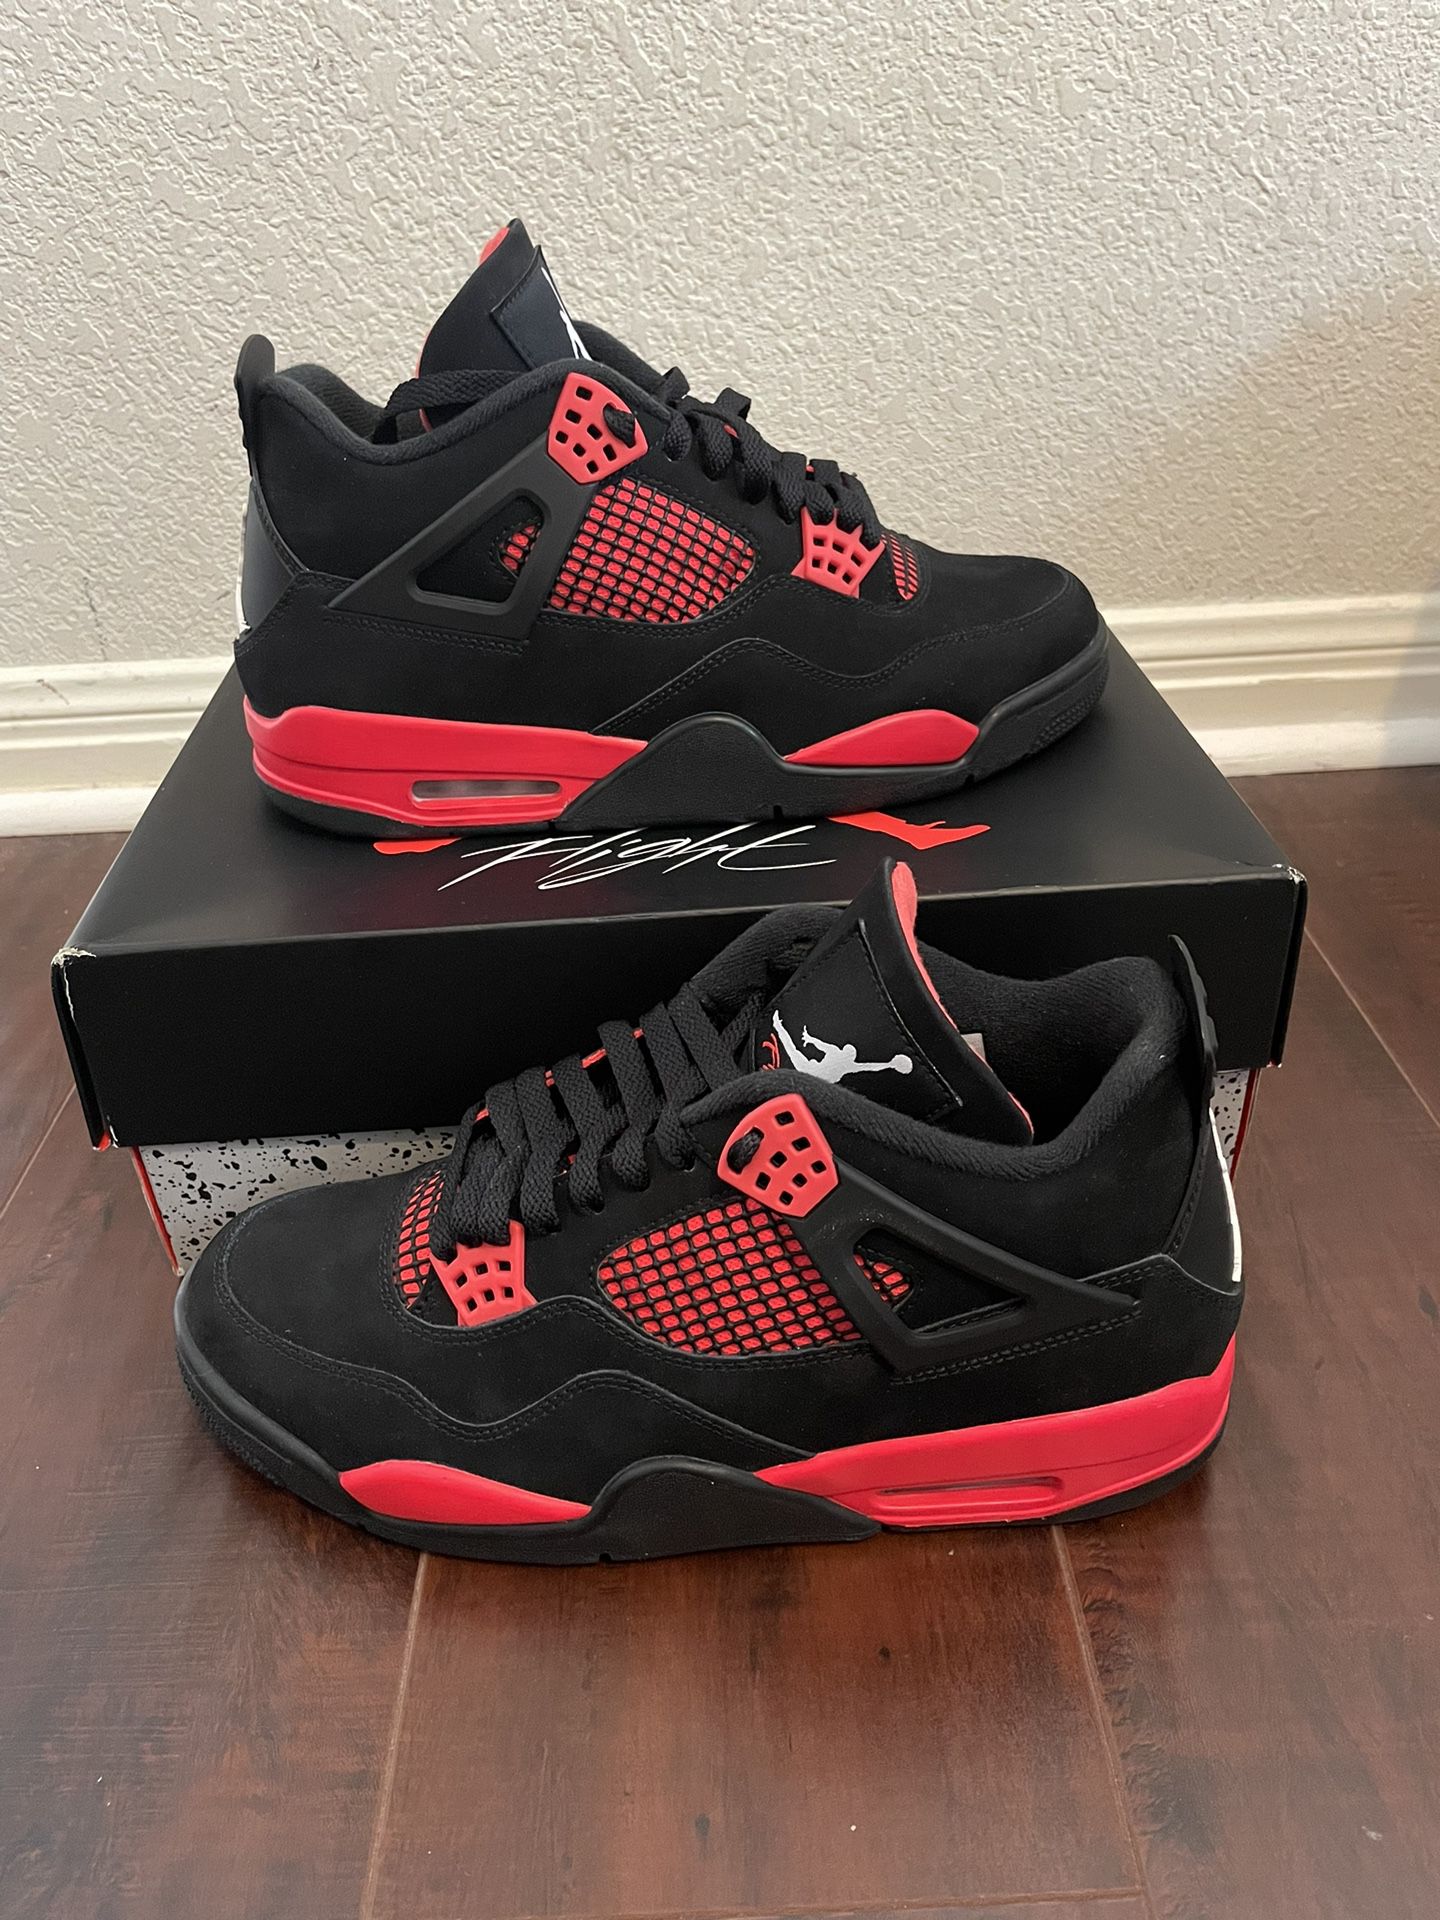 Jordan 4 Red Thunders for Sale in Pflugerville, TX - OfferUp